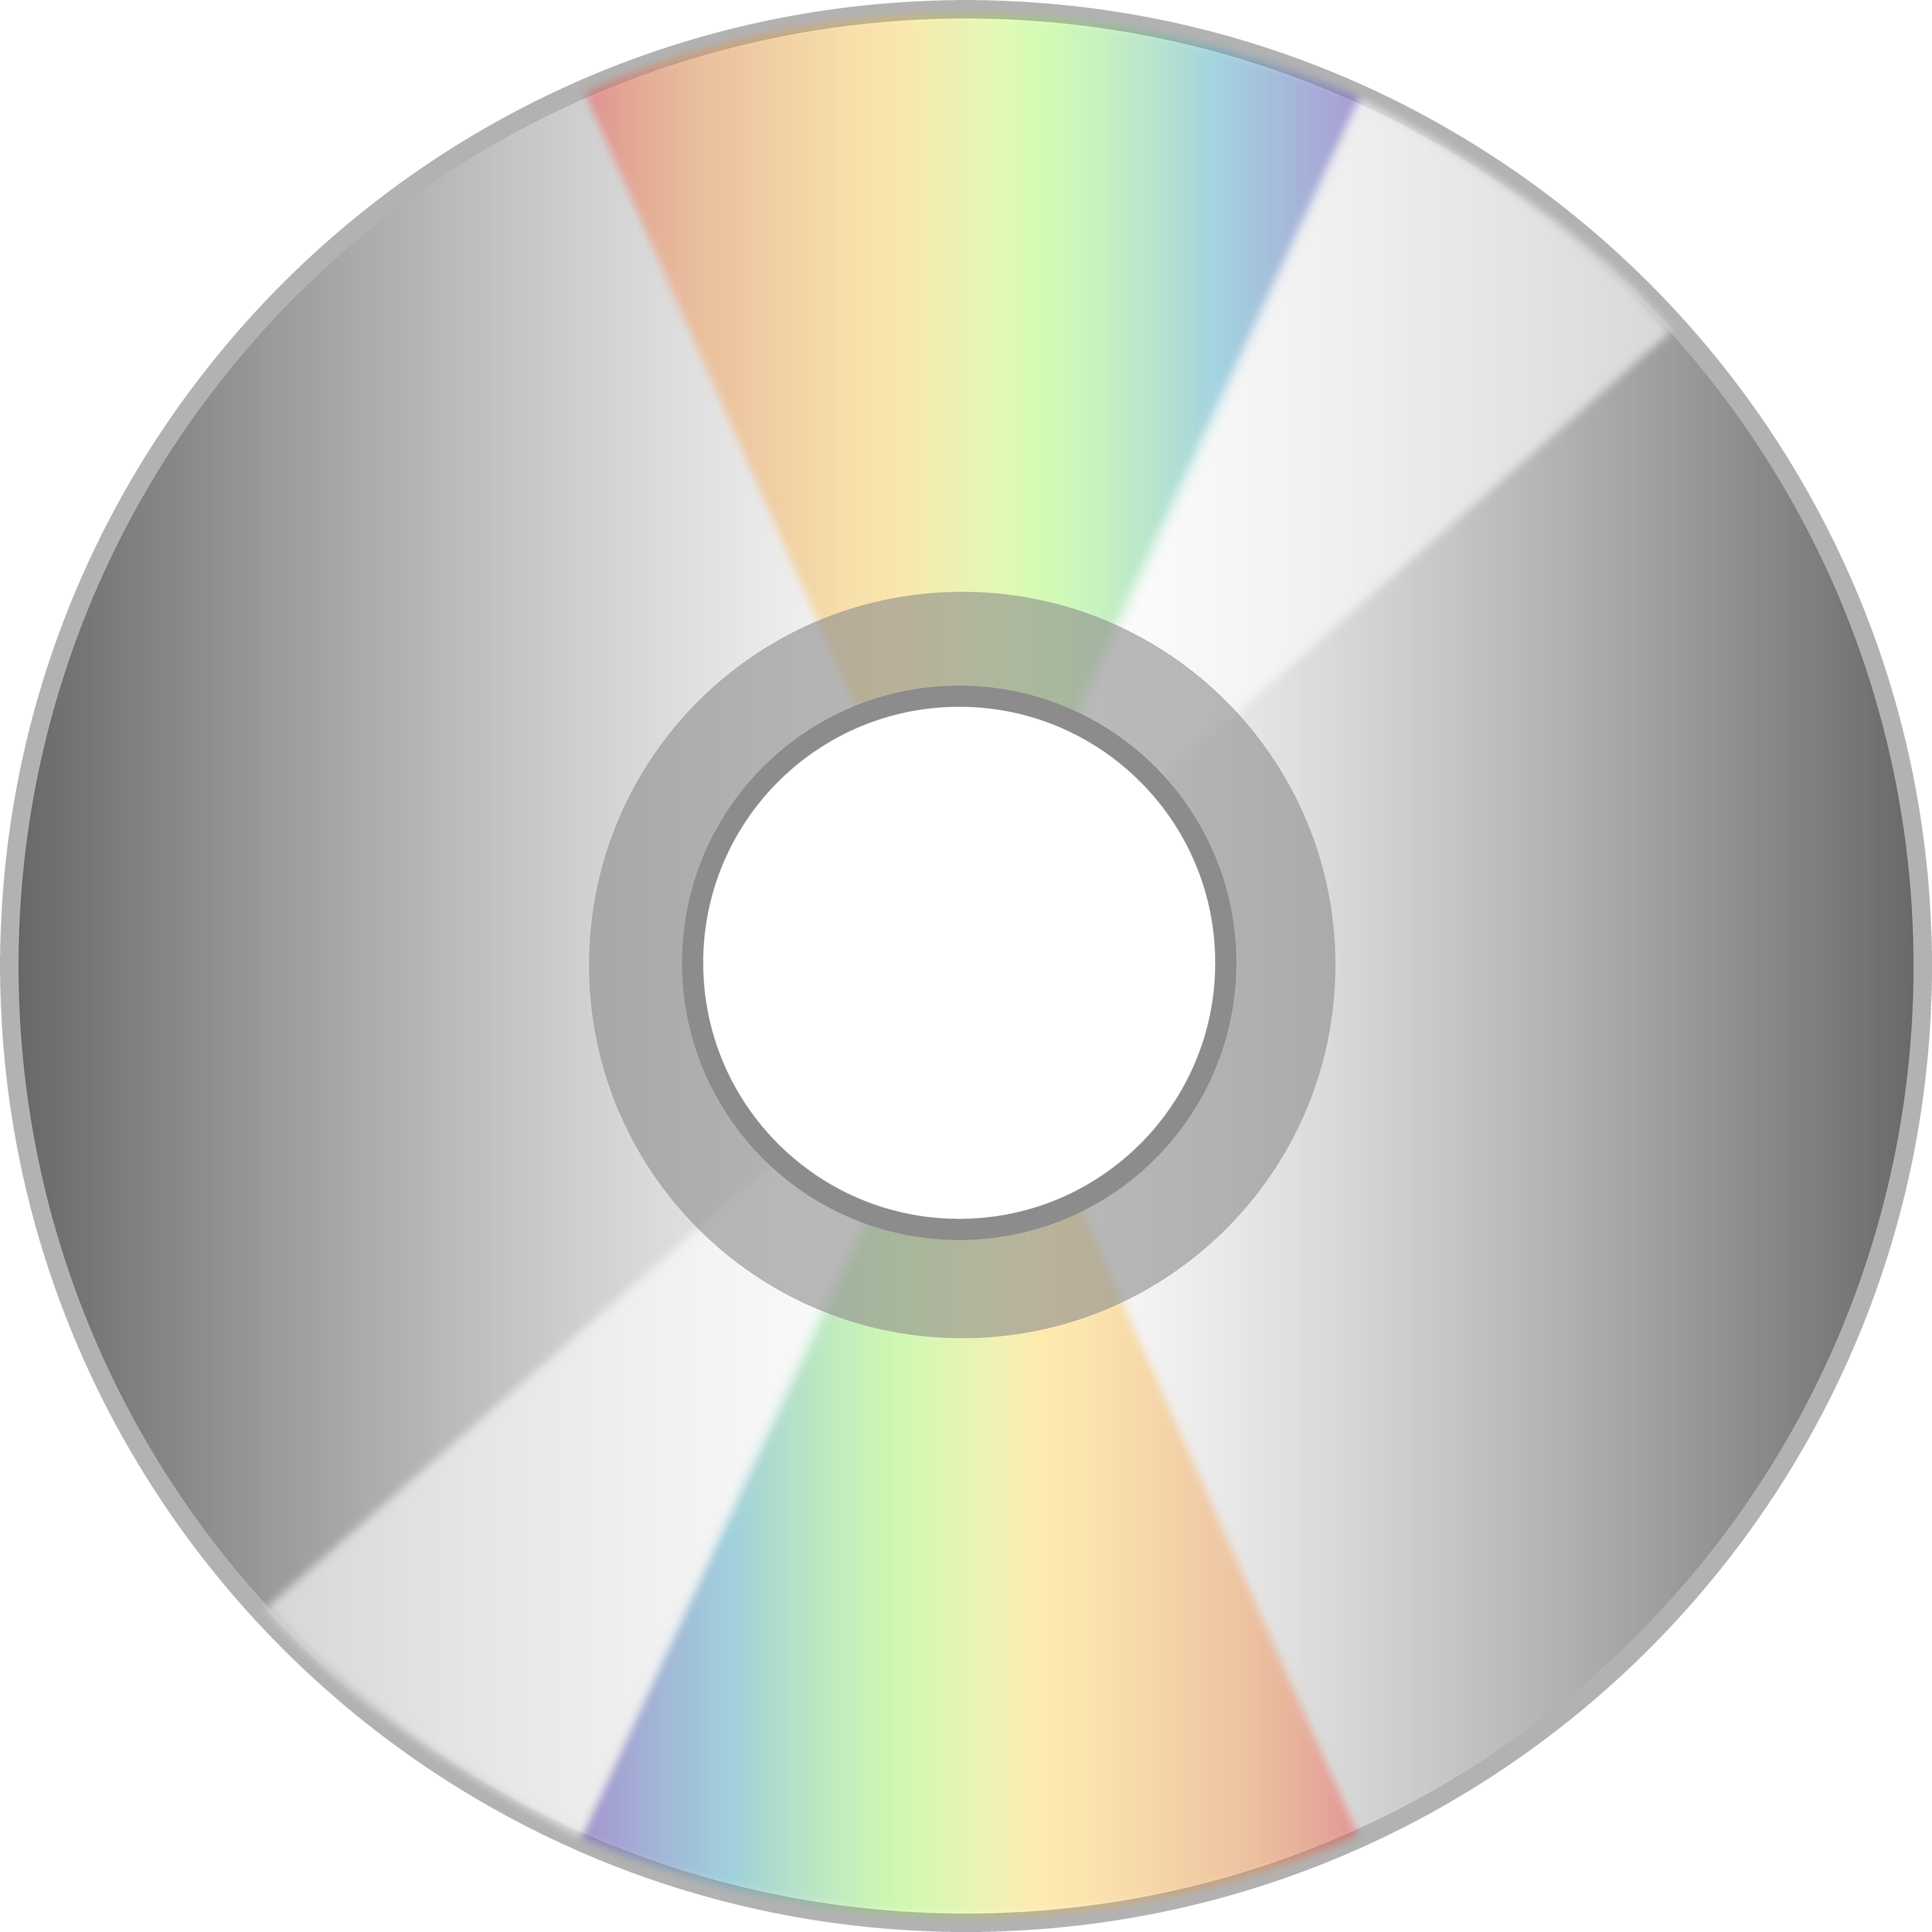 Download Compact Disk Png Images Transparent Gallery. Advertisement - Compact Disc, Transparent background PNG HD thumbnail